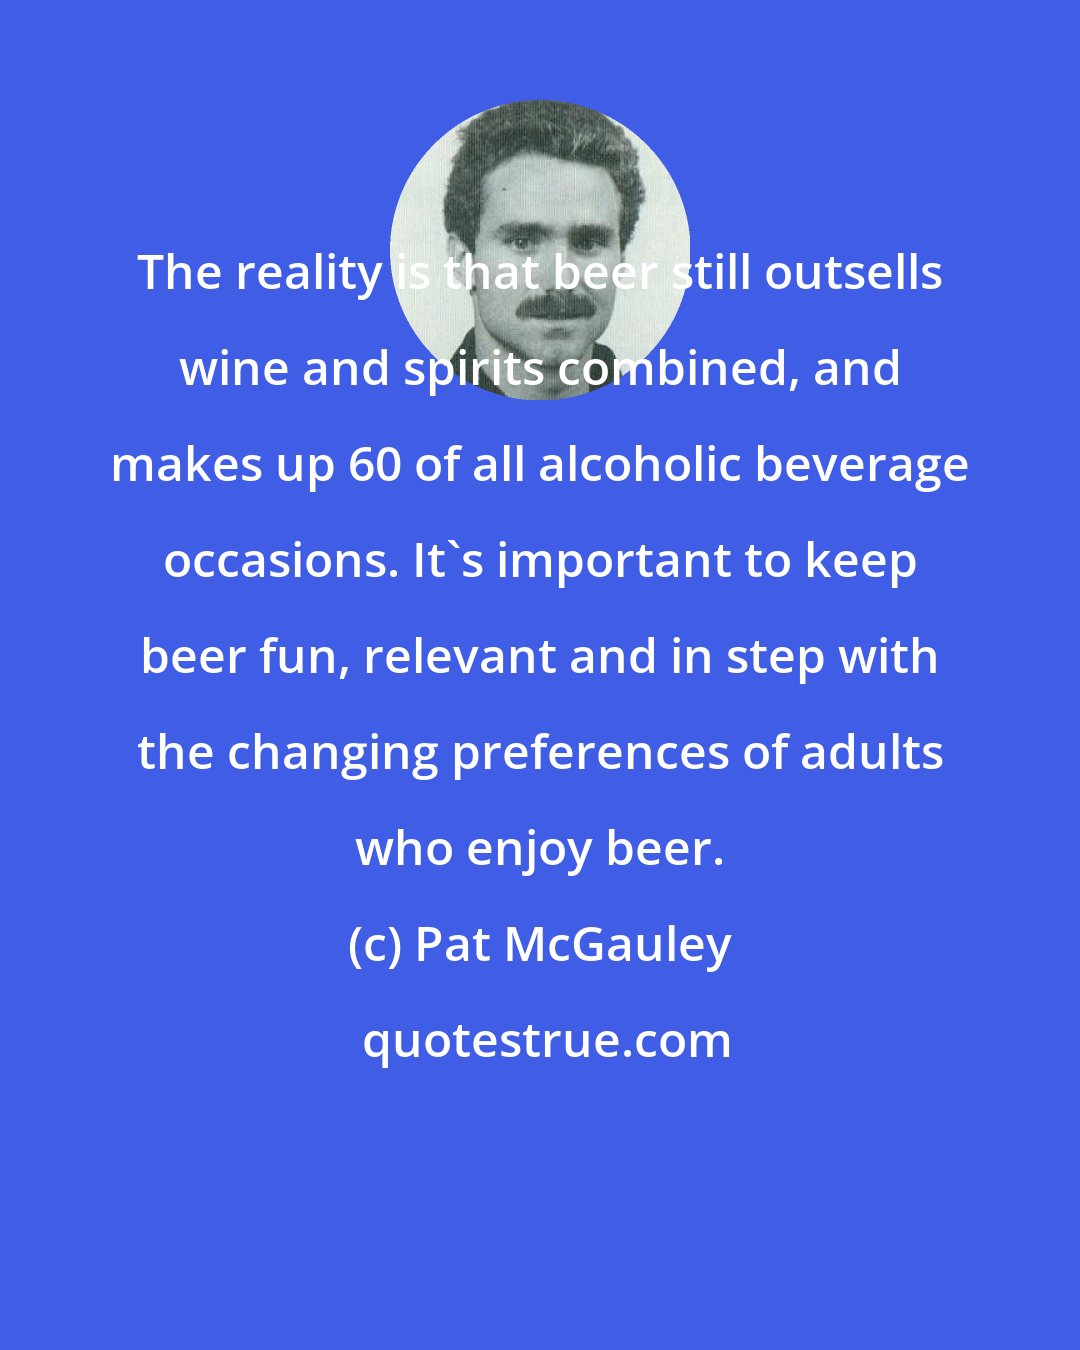 Pat McGauley: The reality is that beer still outsells wine and spirits combined, and makes up 60 of all alcoholic beverage occasions. It's important to keep beer fun, relevant and in step with the changing preferences of adults who enjoy beer.